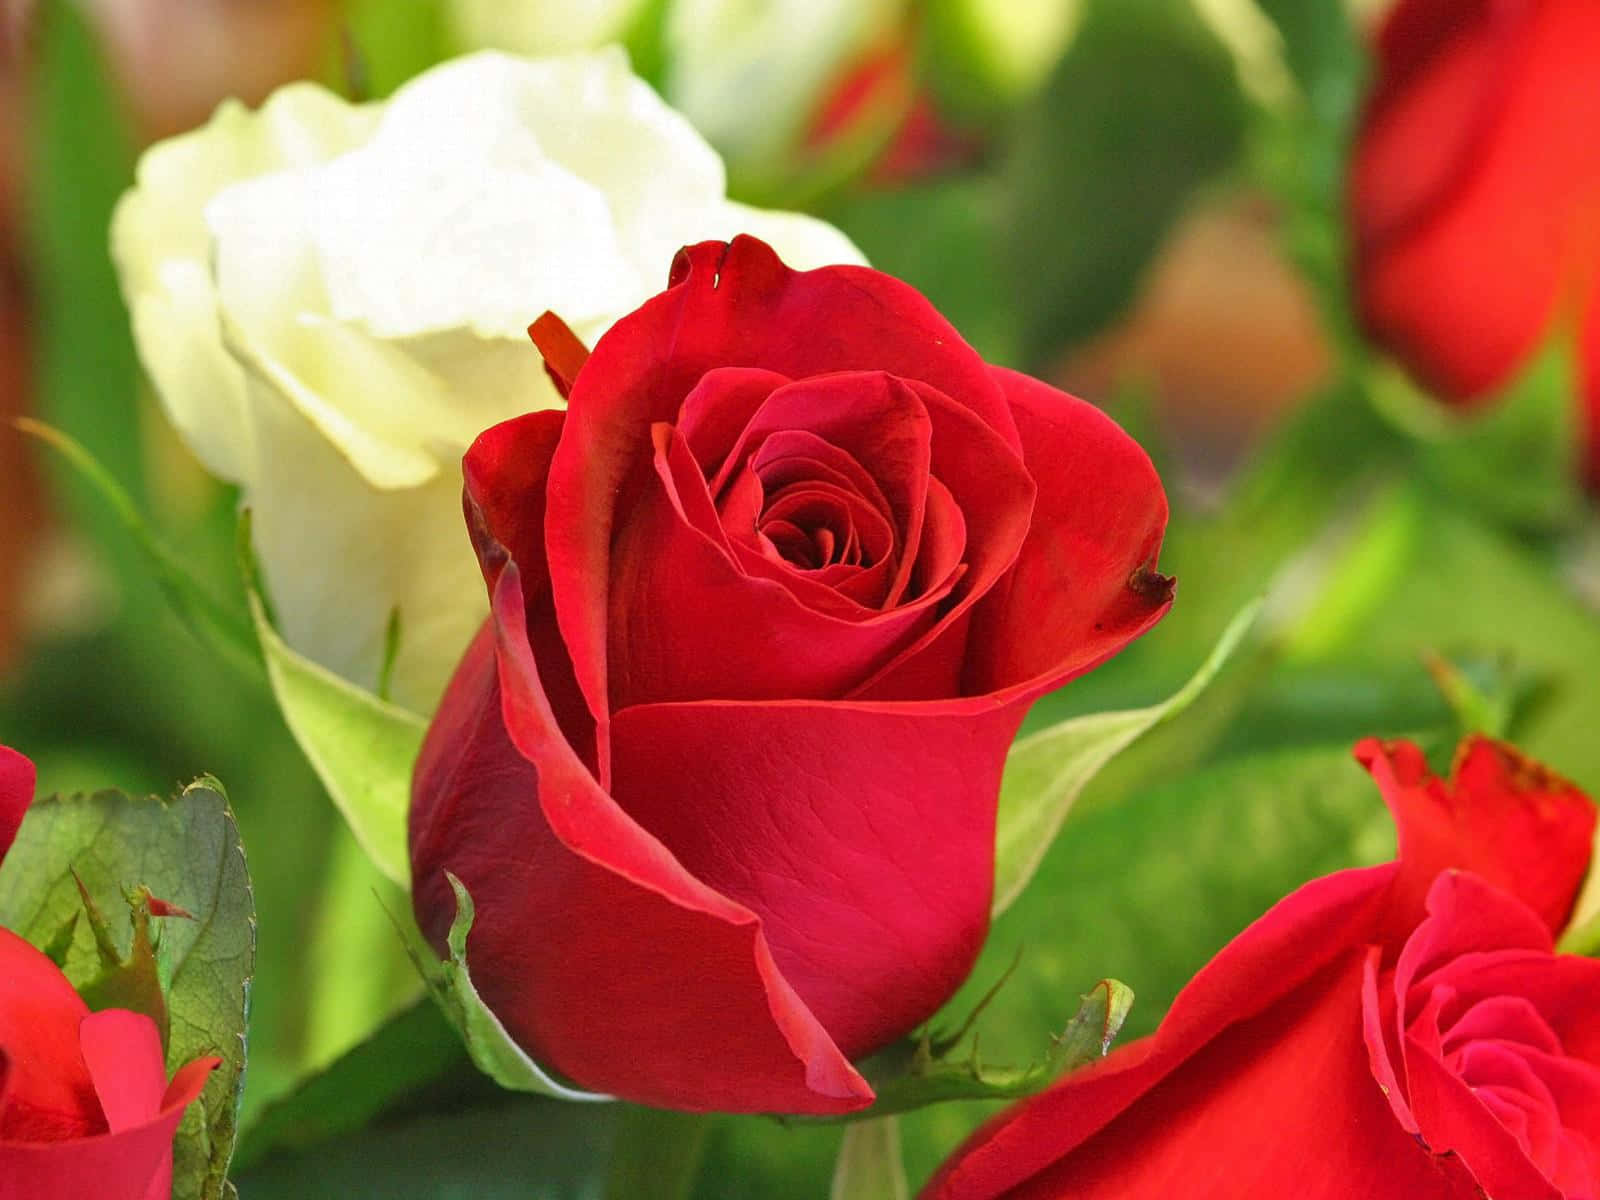 "A gorgeous display of beautiful roses" Wallpaper